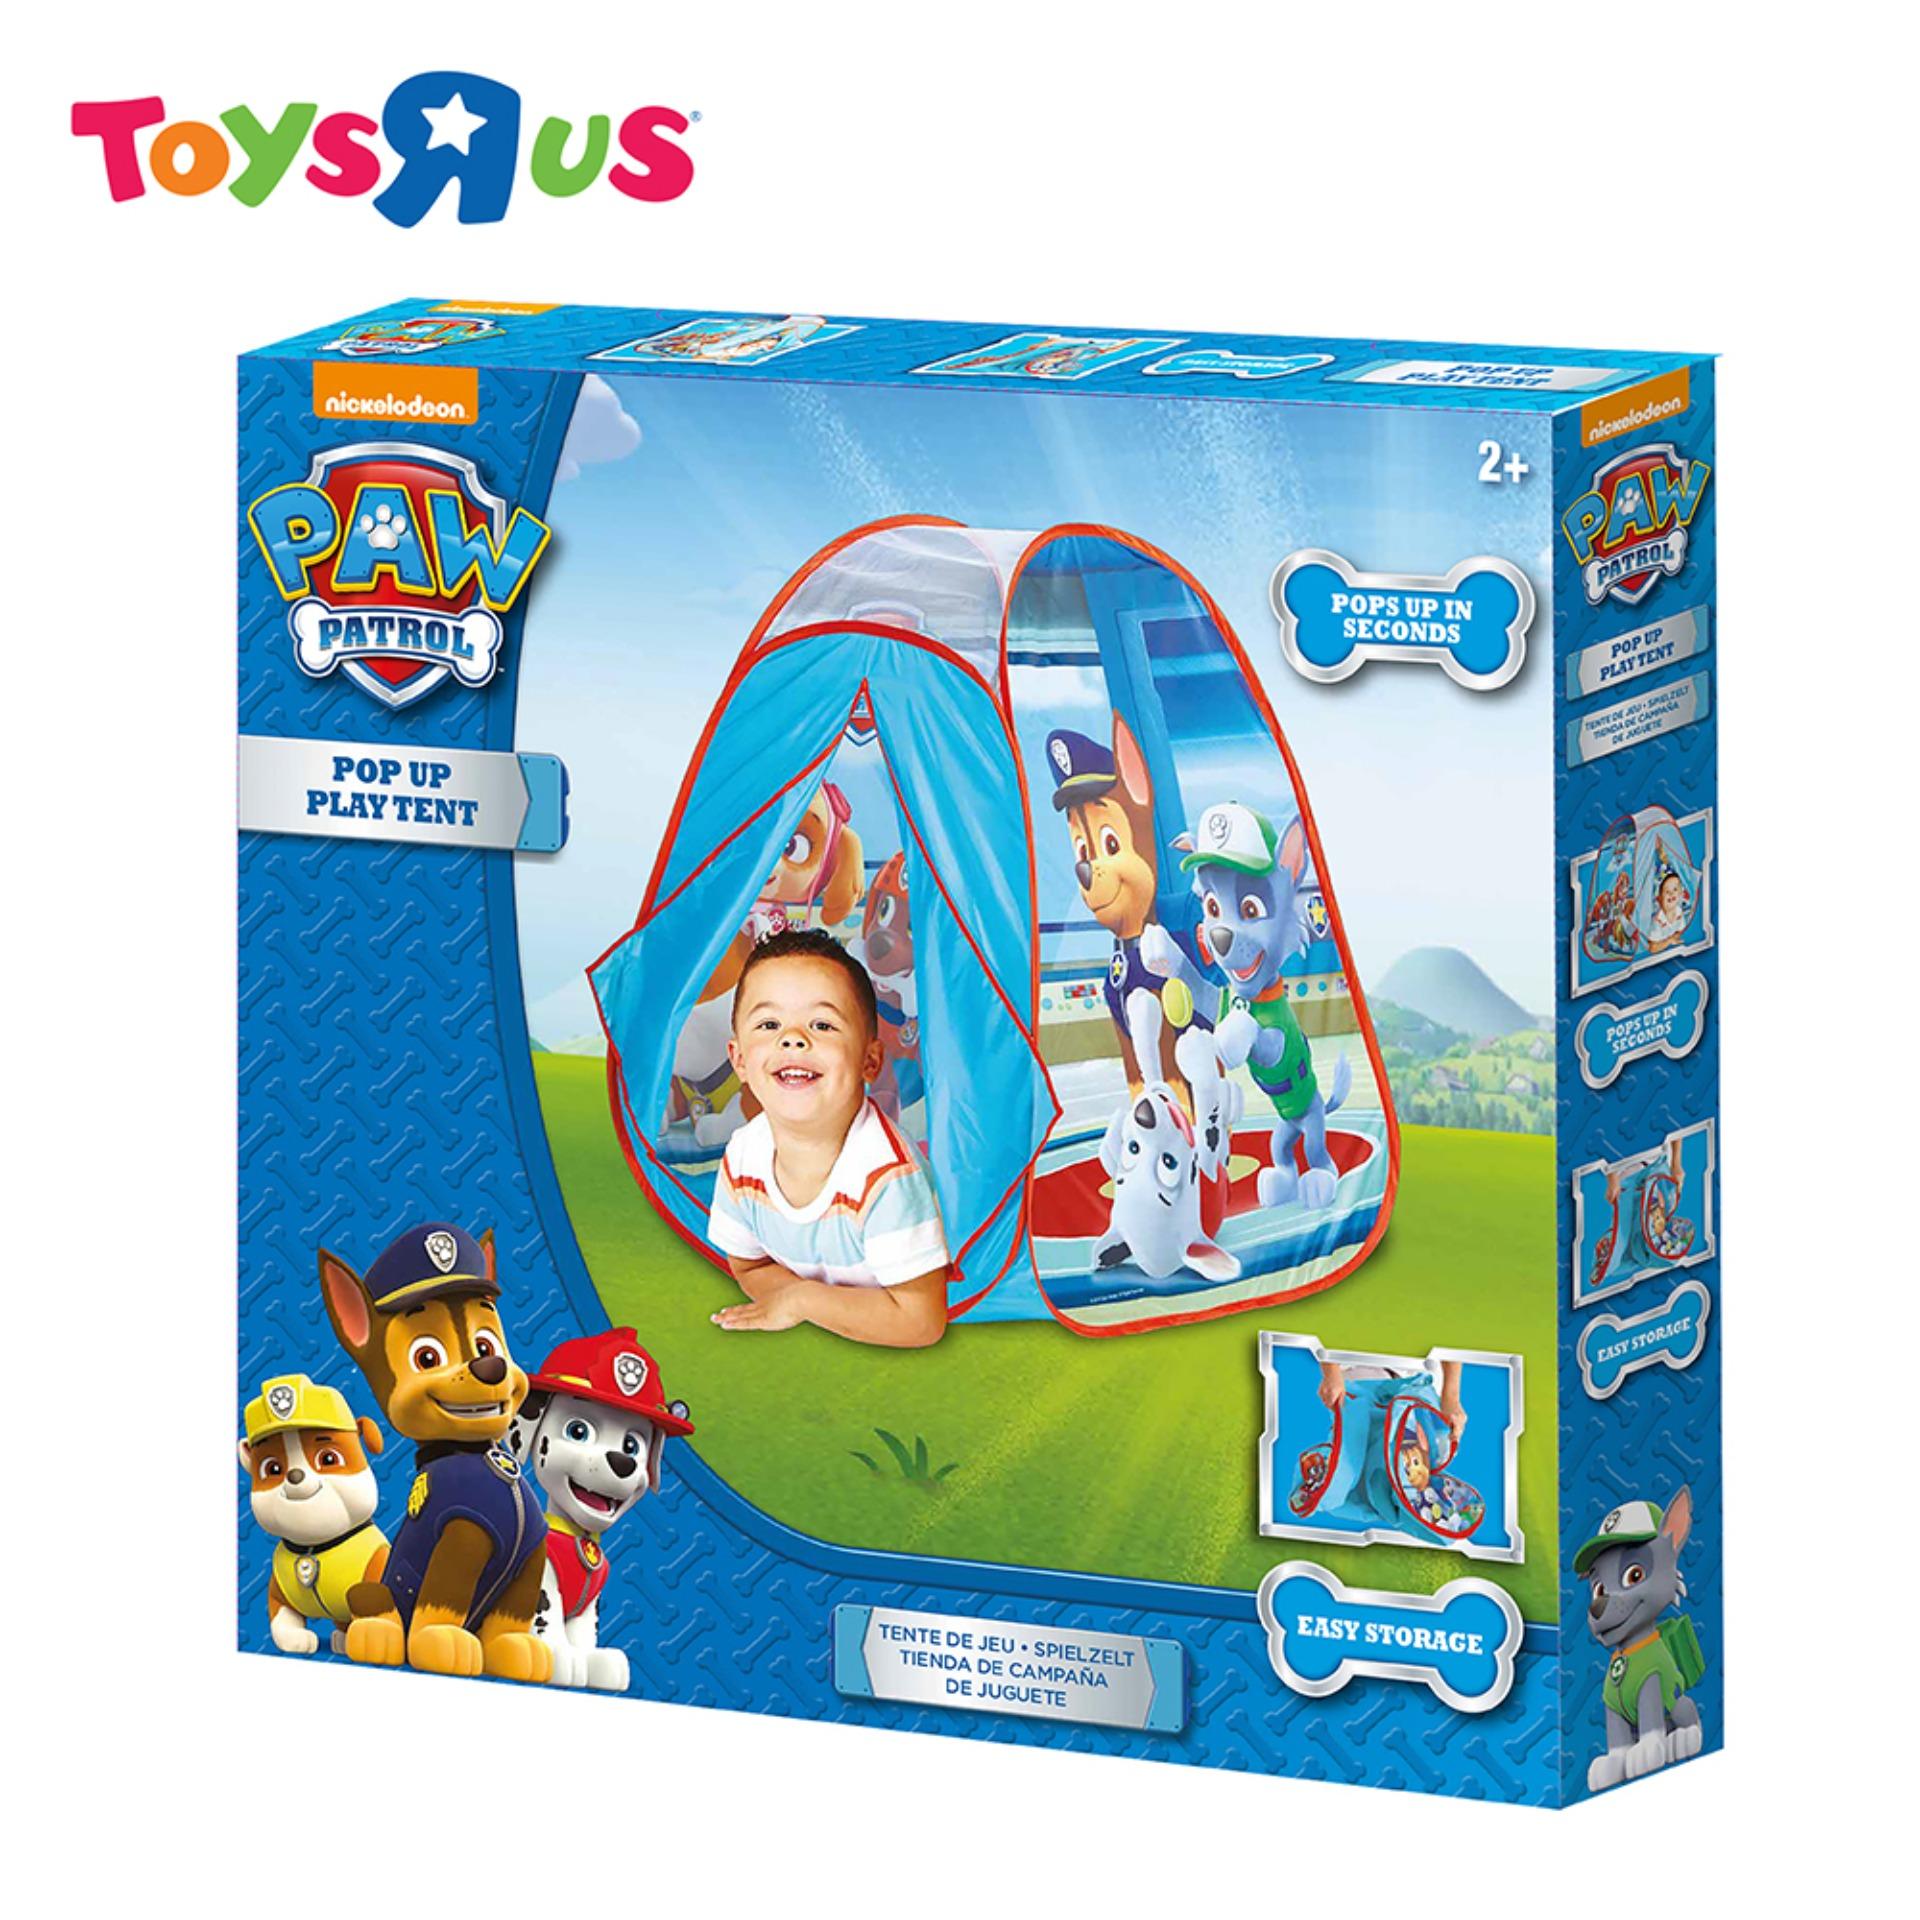 PAW Pop Up Play Tent | Toys Us